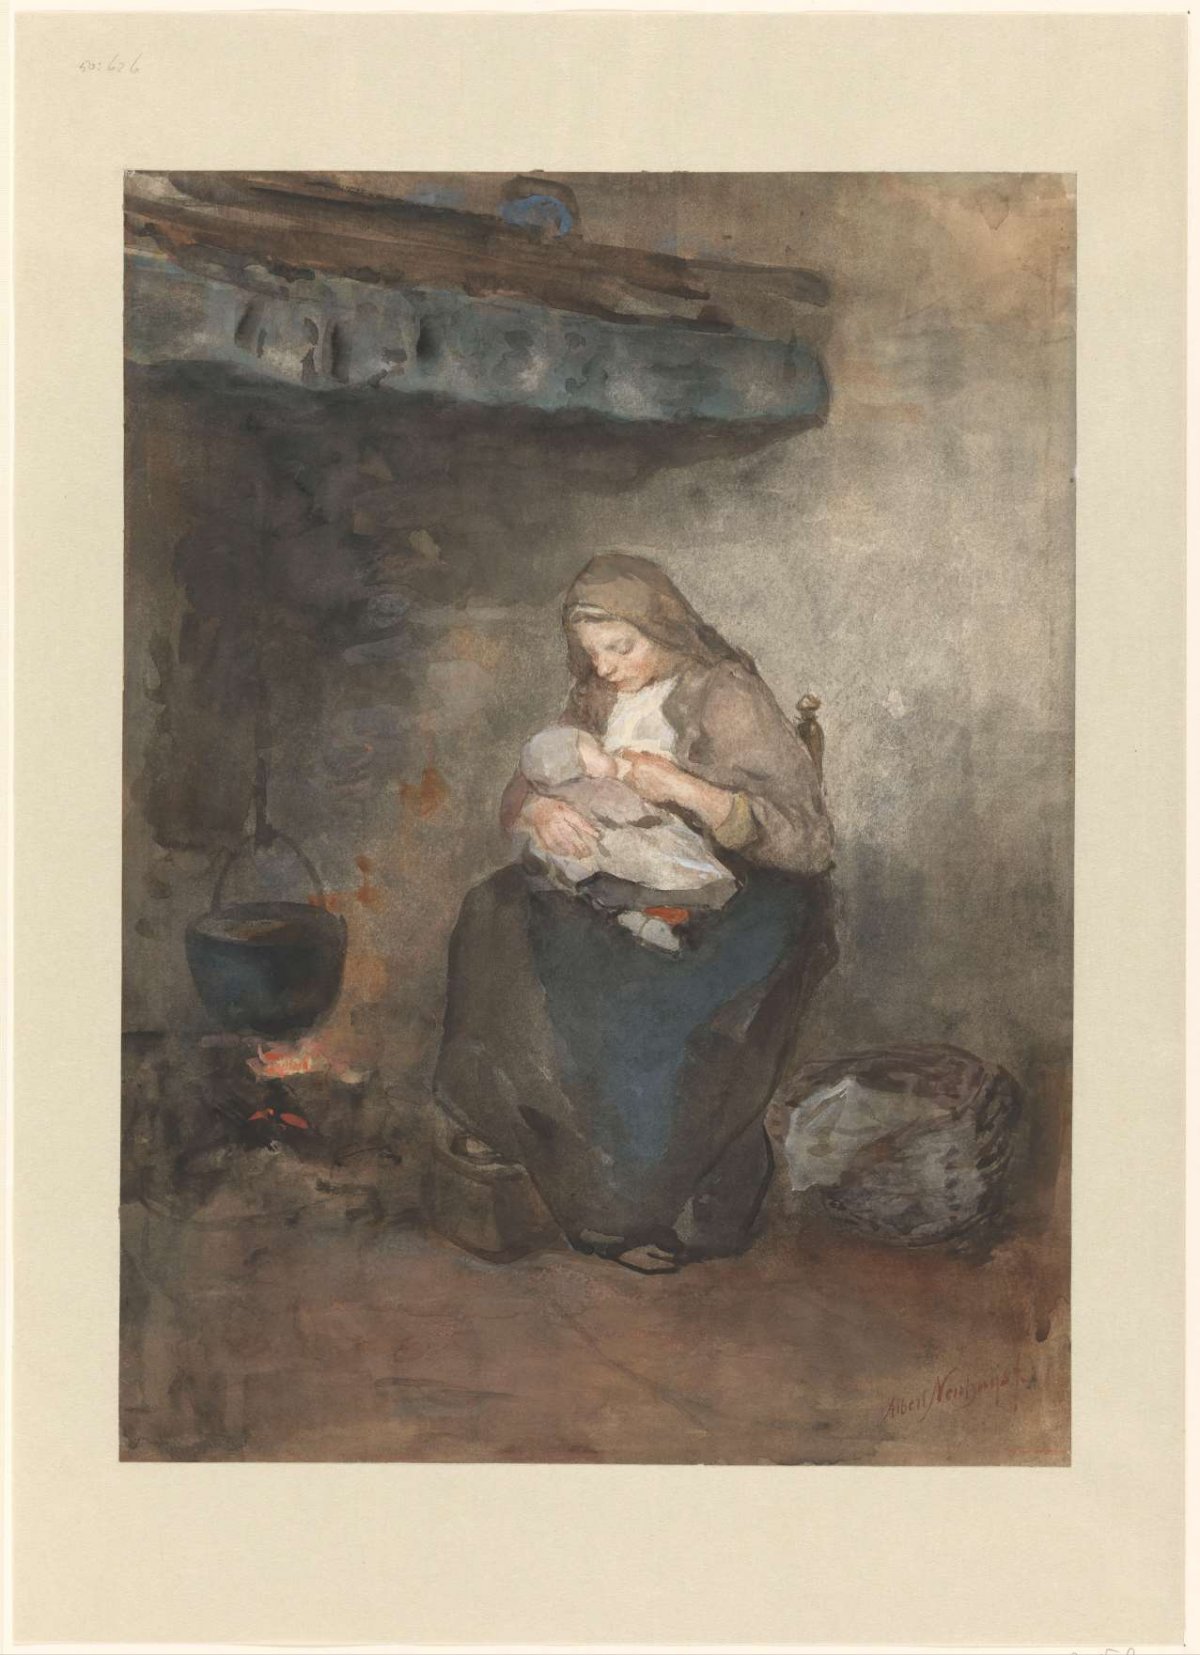 Mother suckling her child by the fireplace, Albert Neuhuys (1844-1914), 1854 - 1914